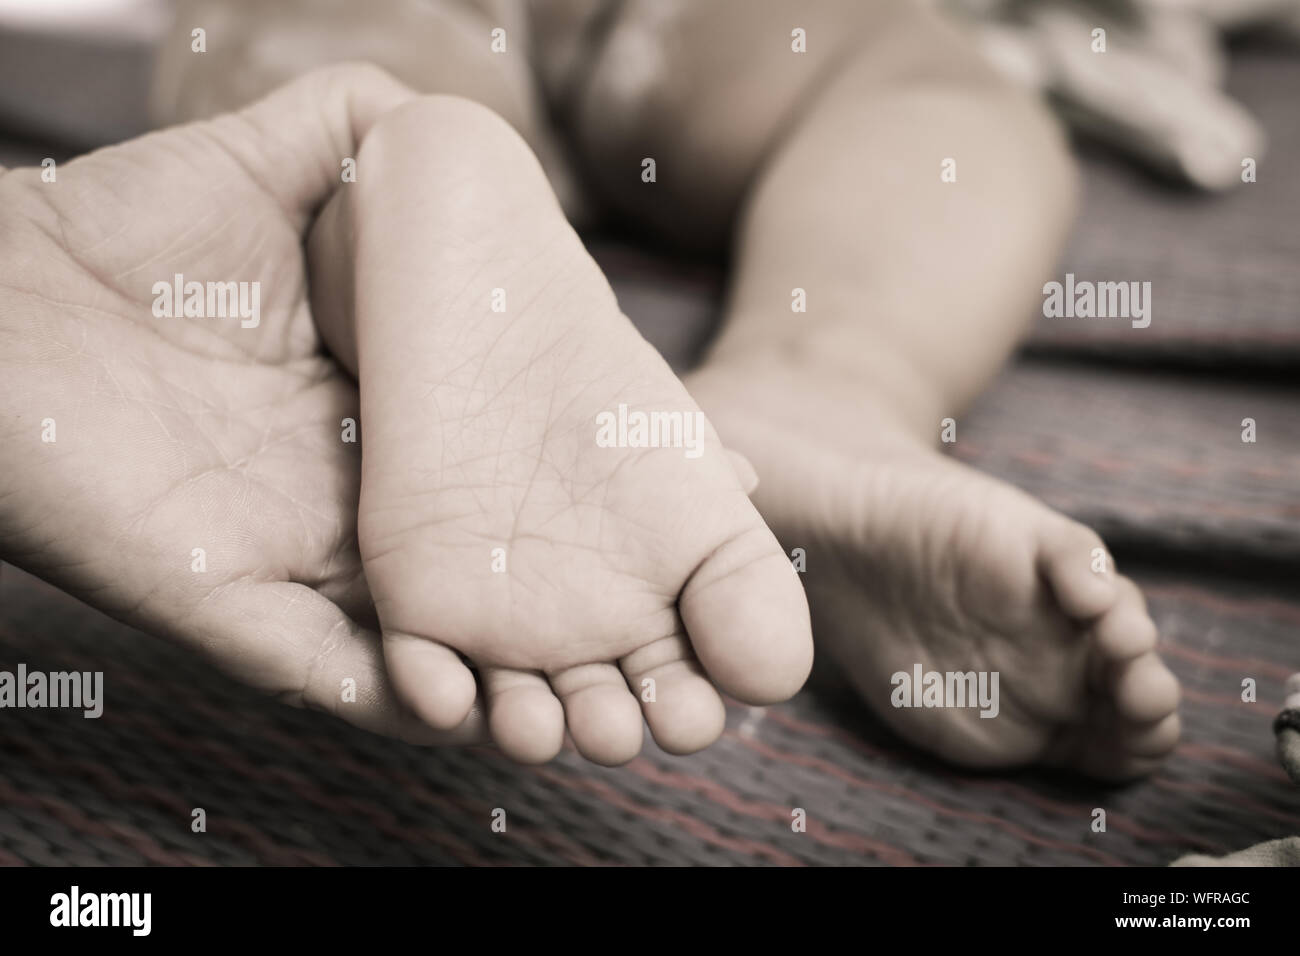 Cropped Hand Holding Baby Feet On Bed Stock Photo